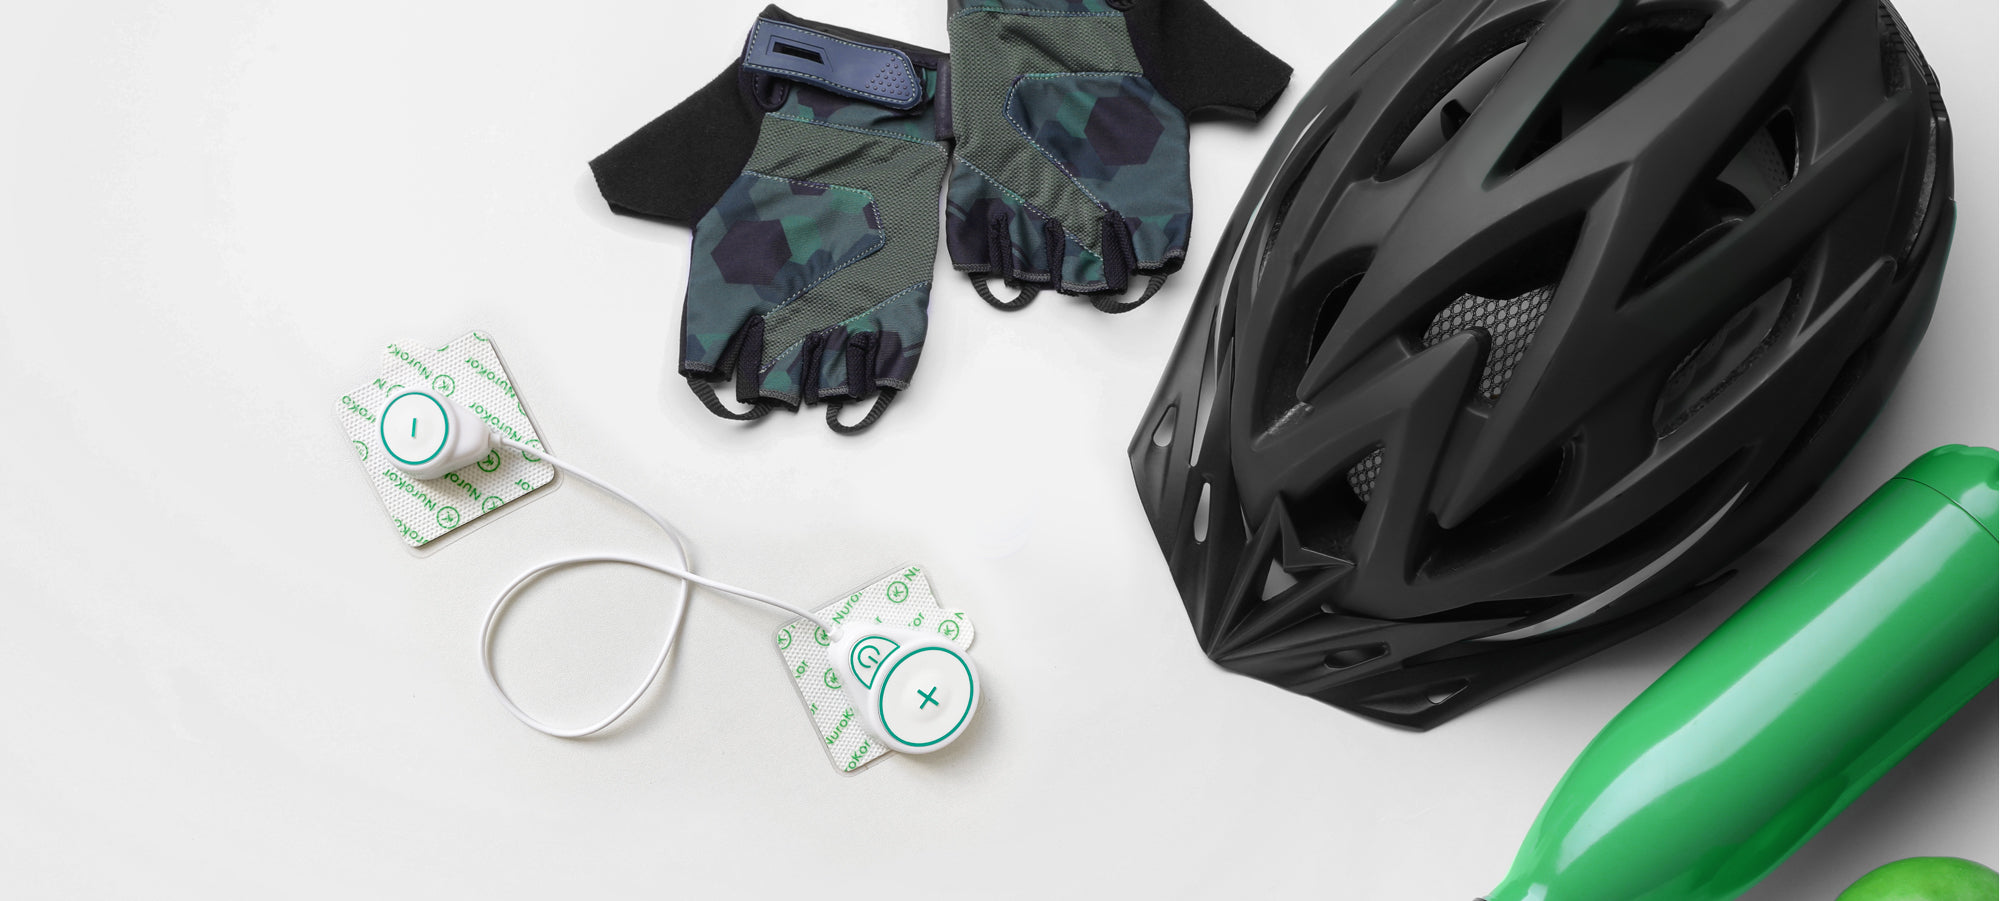 NuroKor Lifetech’s guide to cycling injuries and getting back in the saddle